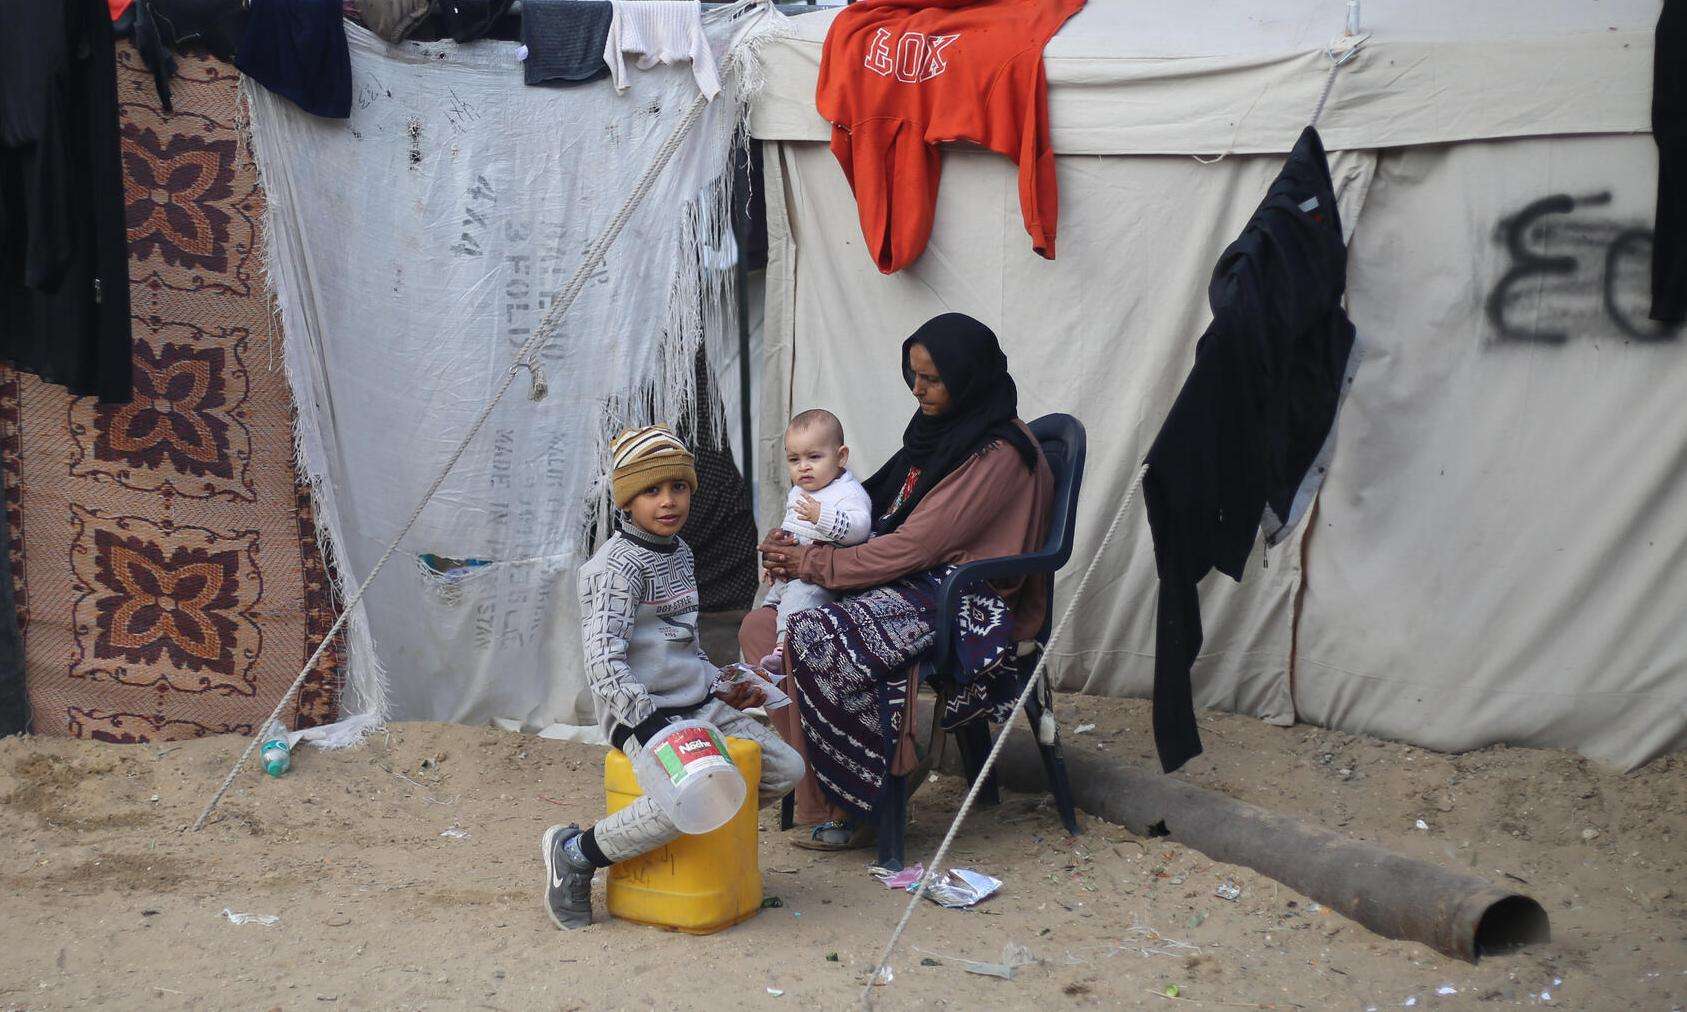 A displaced Palestinian woman with her children outside a makeshift tent in Gaza.